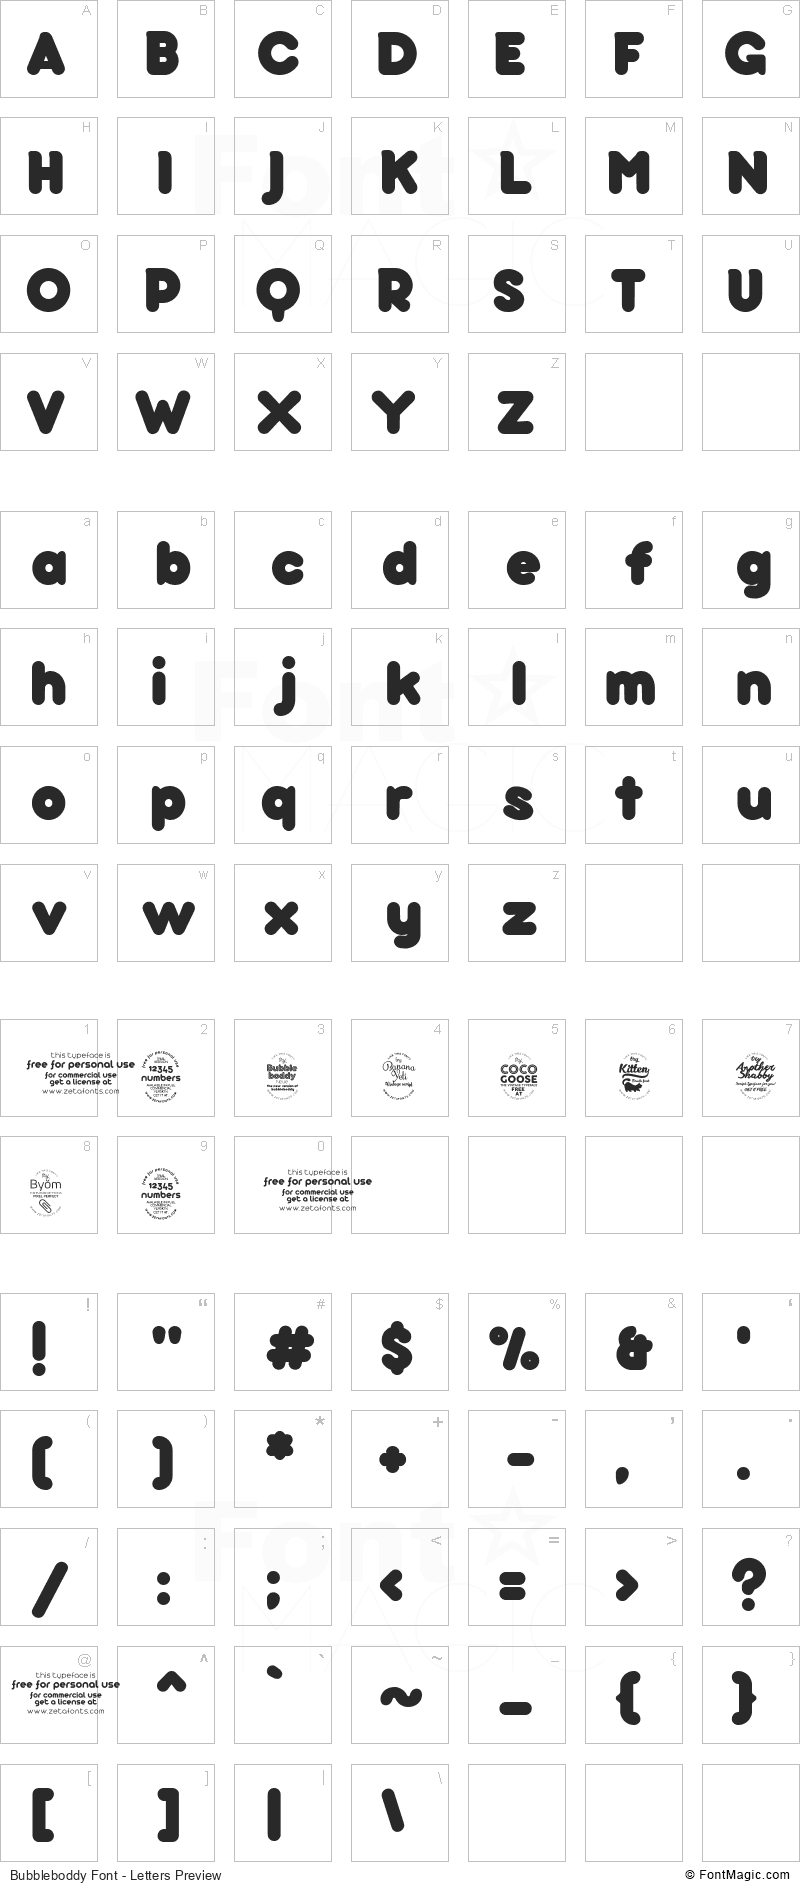 Bubbleboddy Font - All Latters Preview Chart